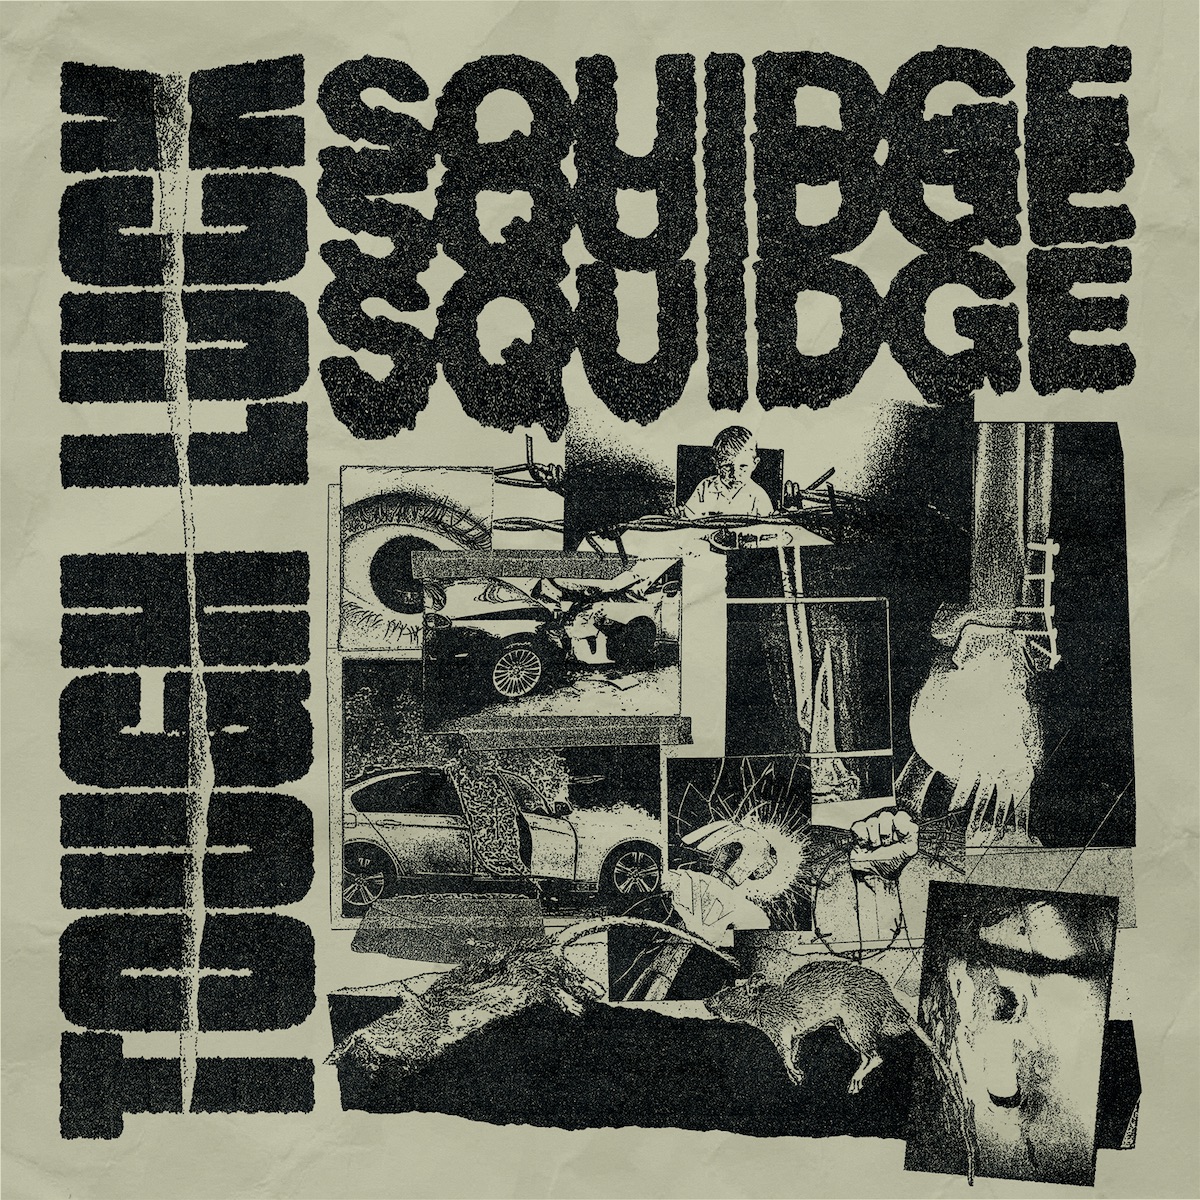 EP REVIEW: Tough Luck by Squidge